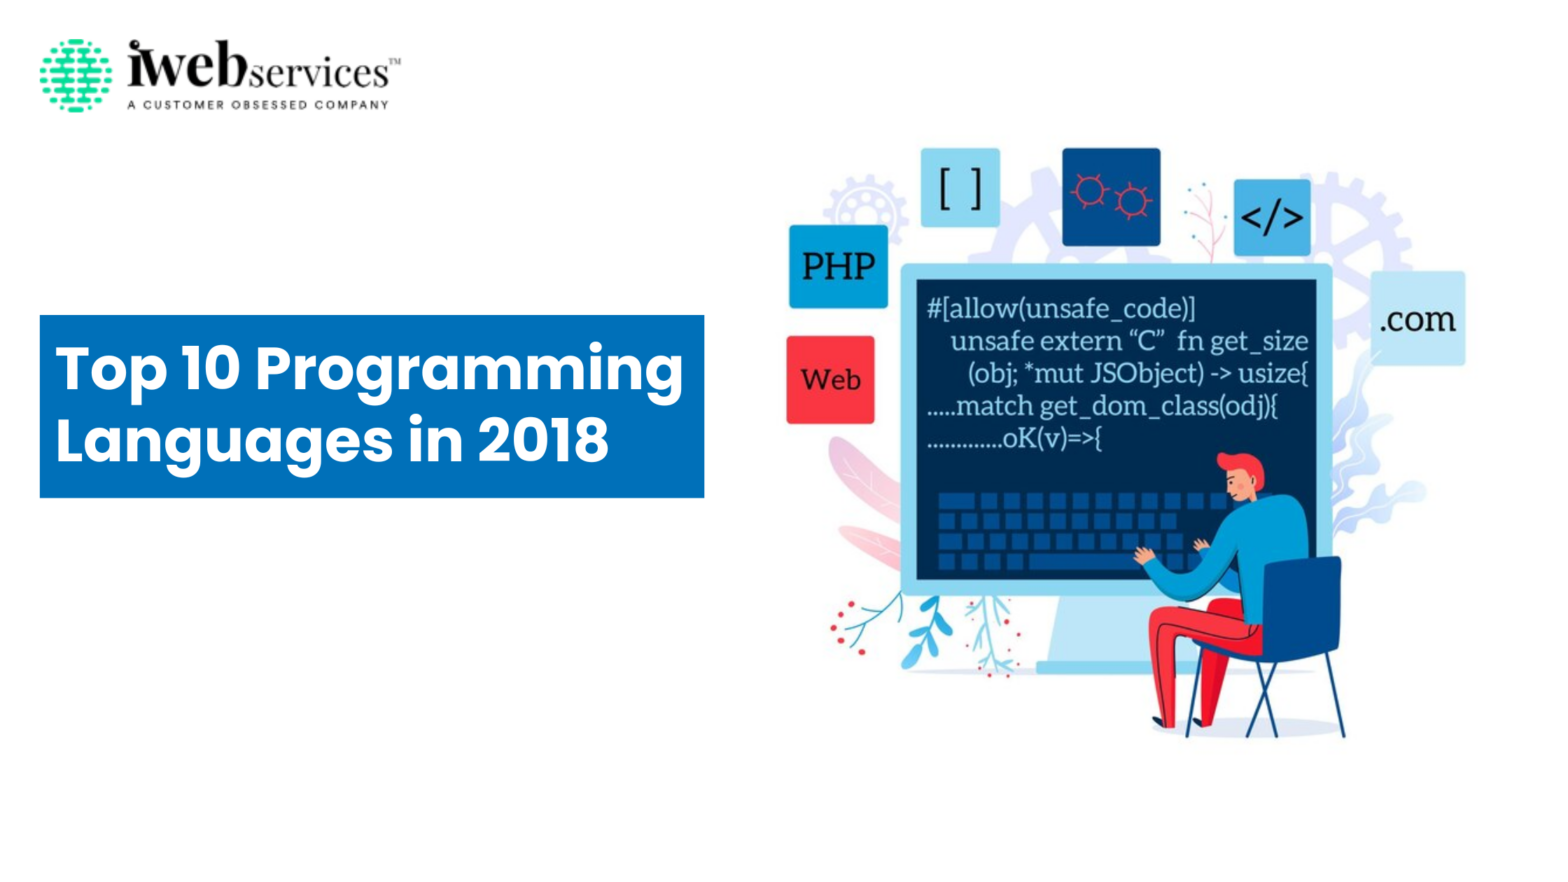 Top 10 Programming Languages in 2018